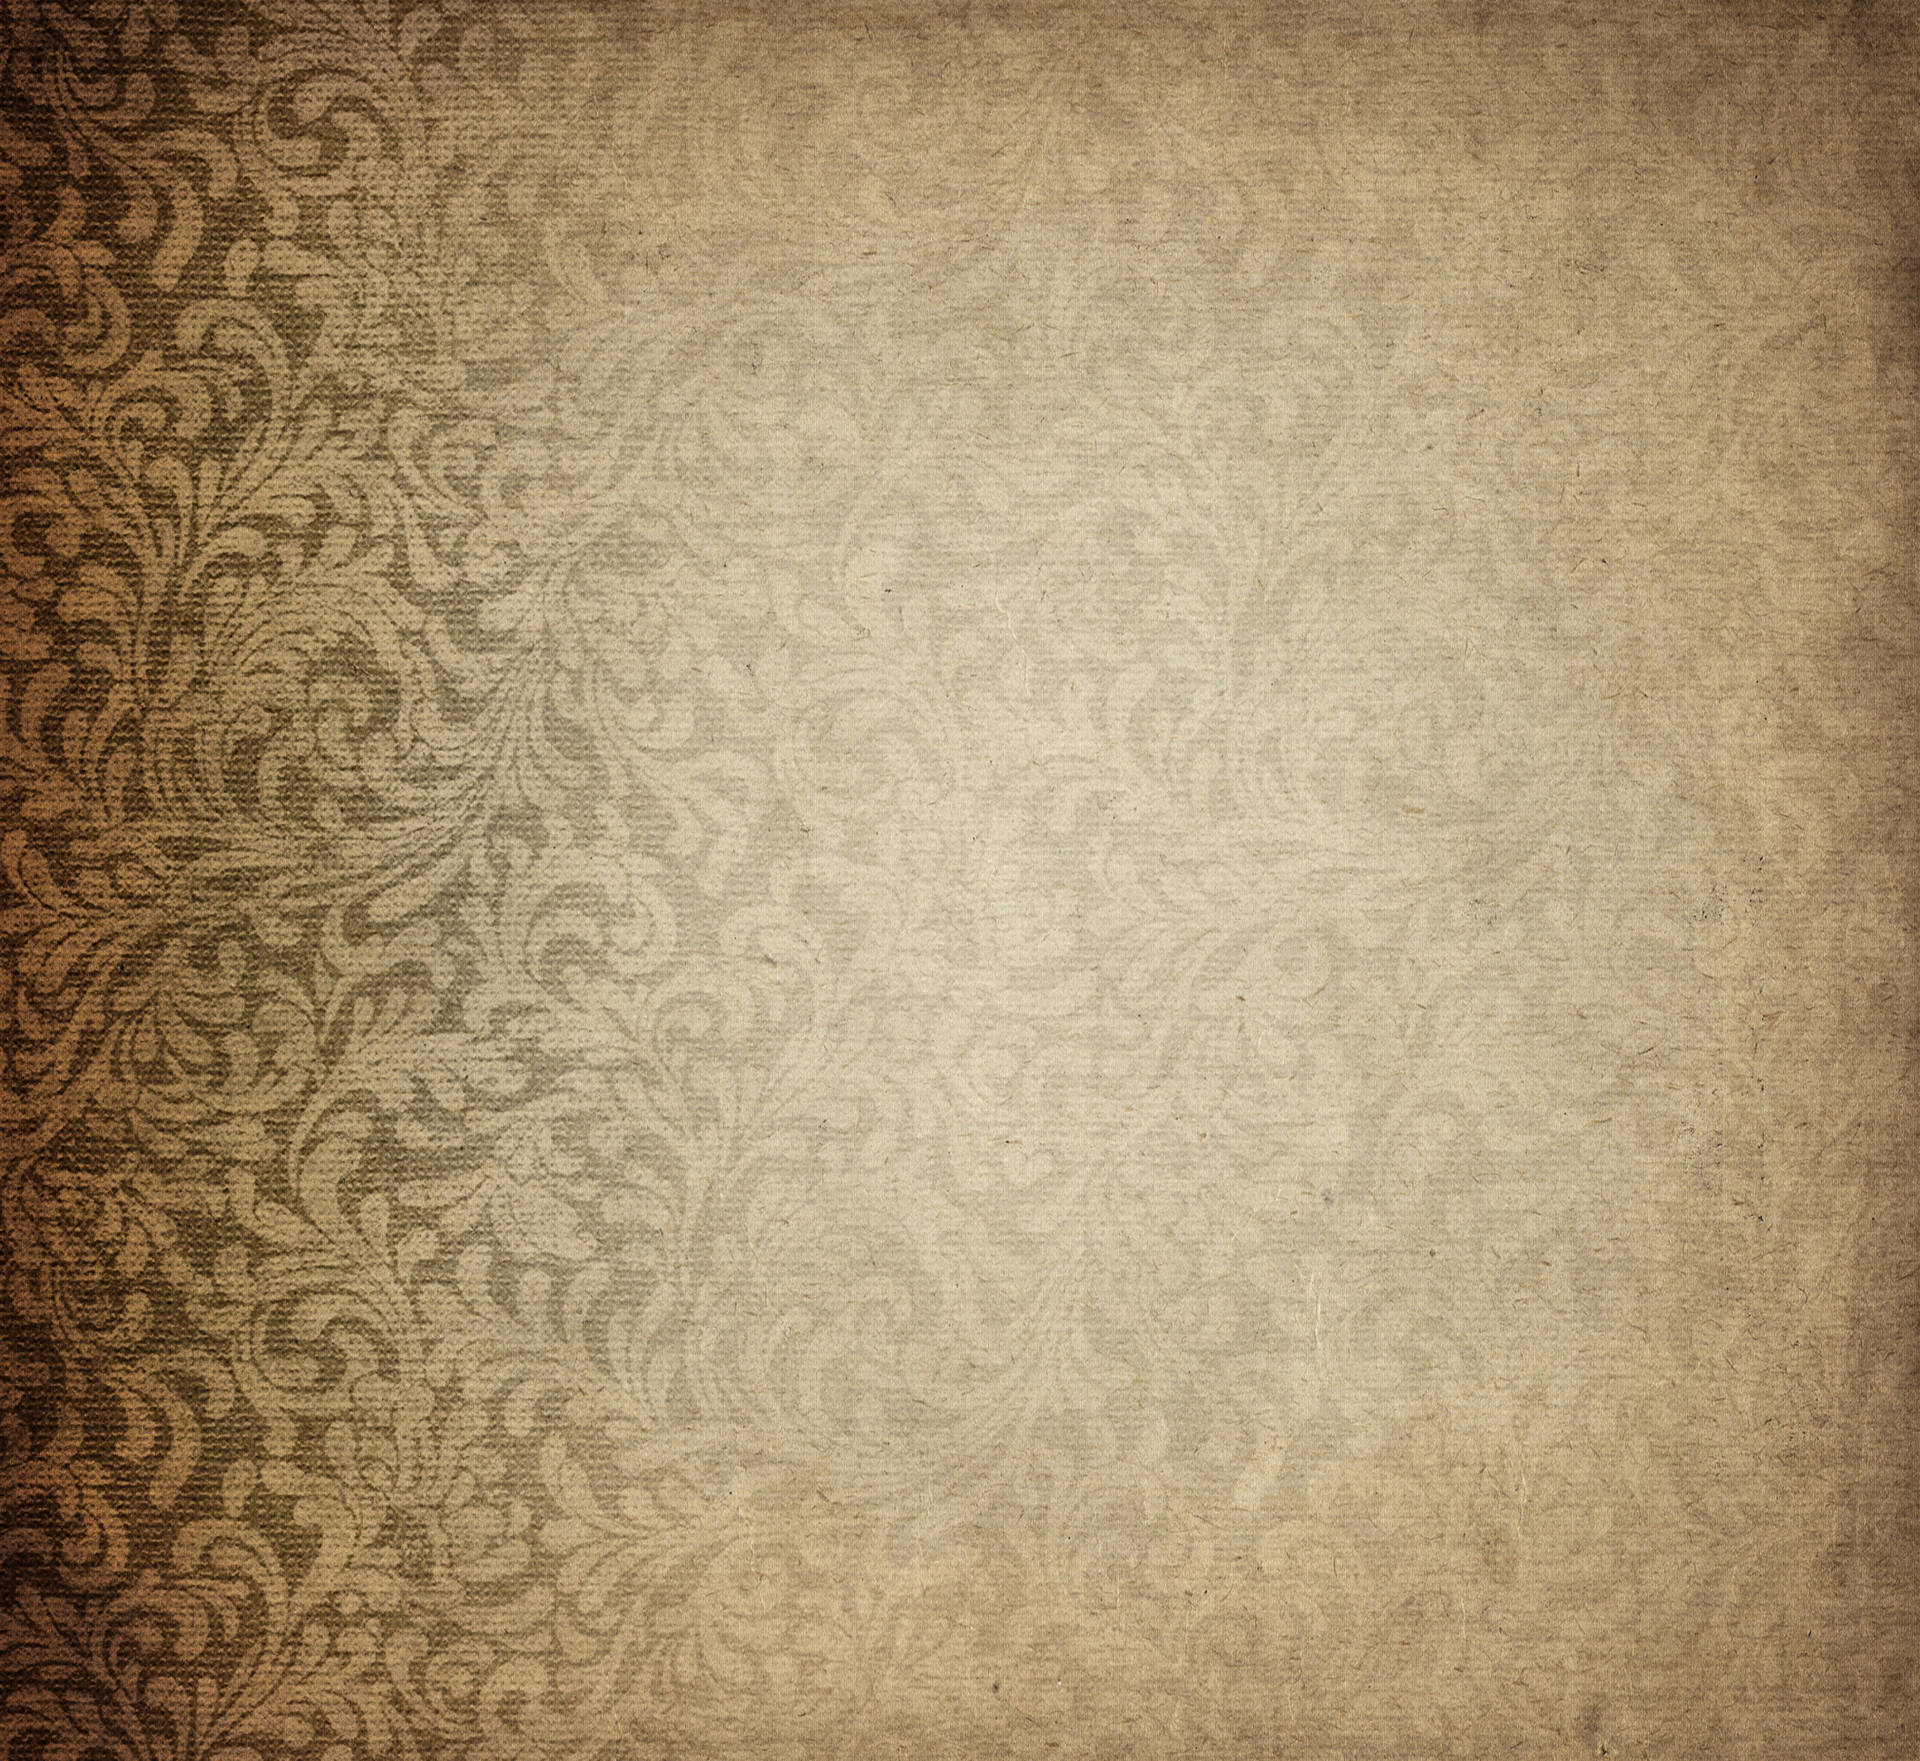 Old Paper With Paisley Design Background